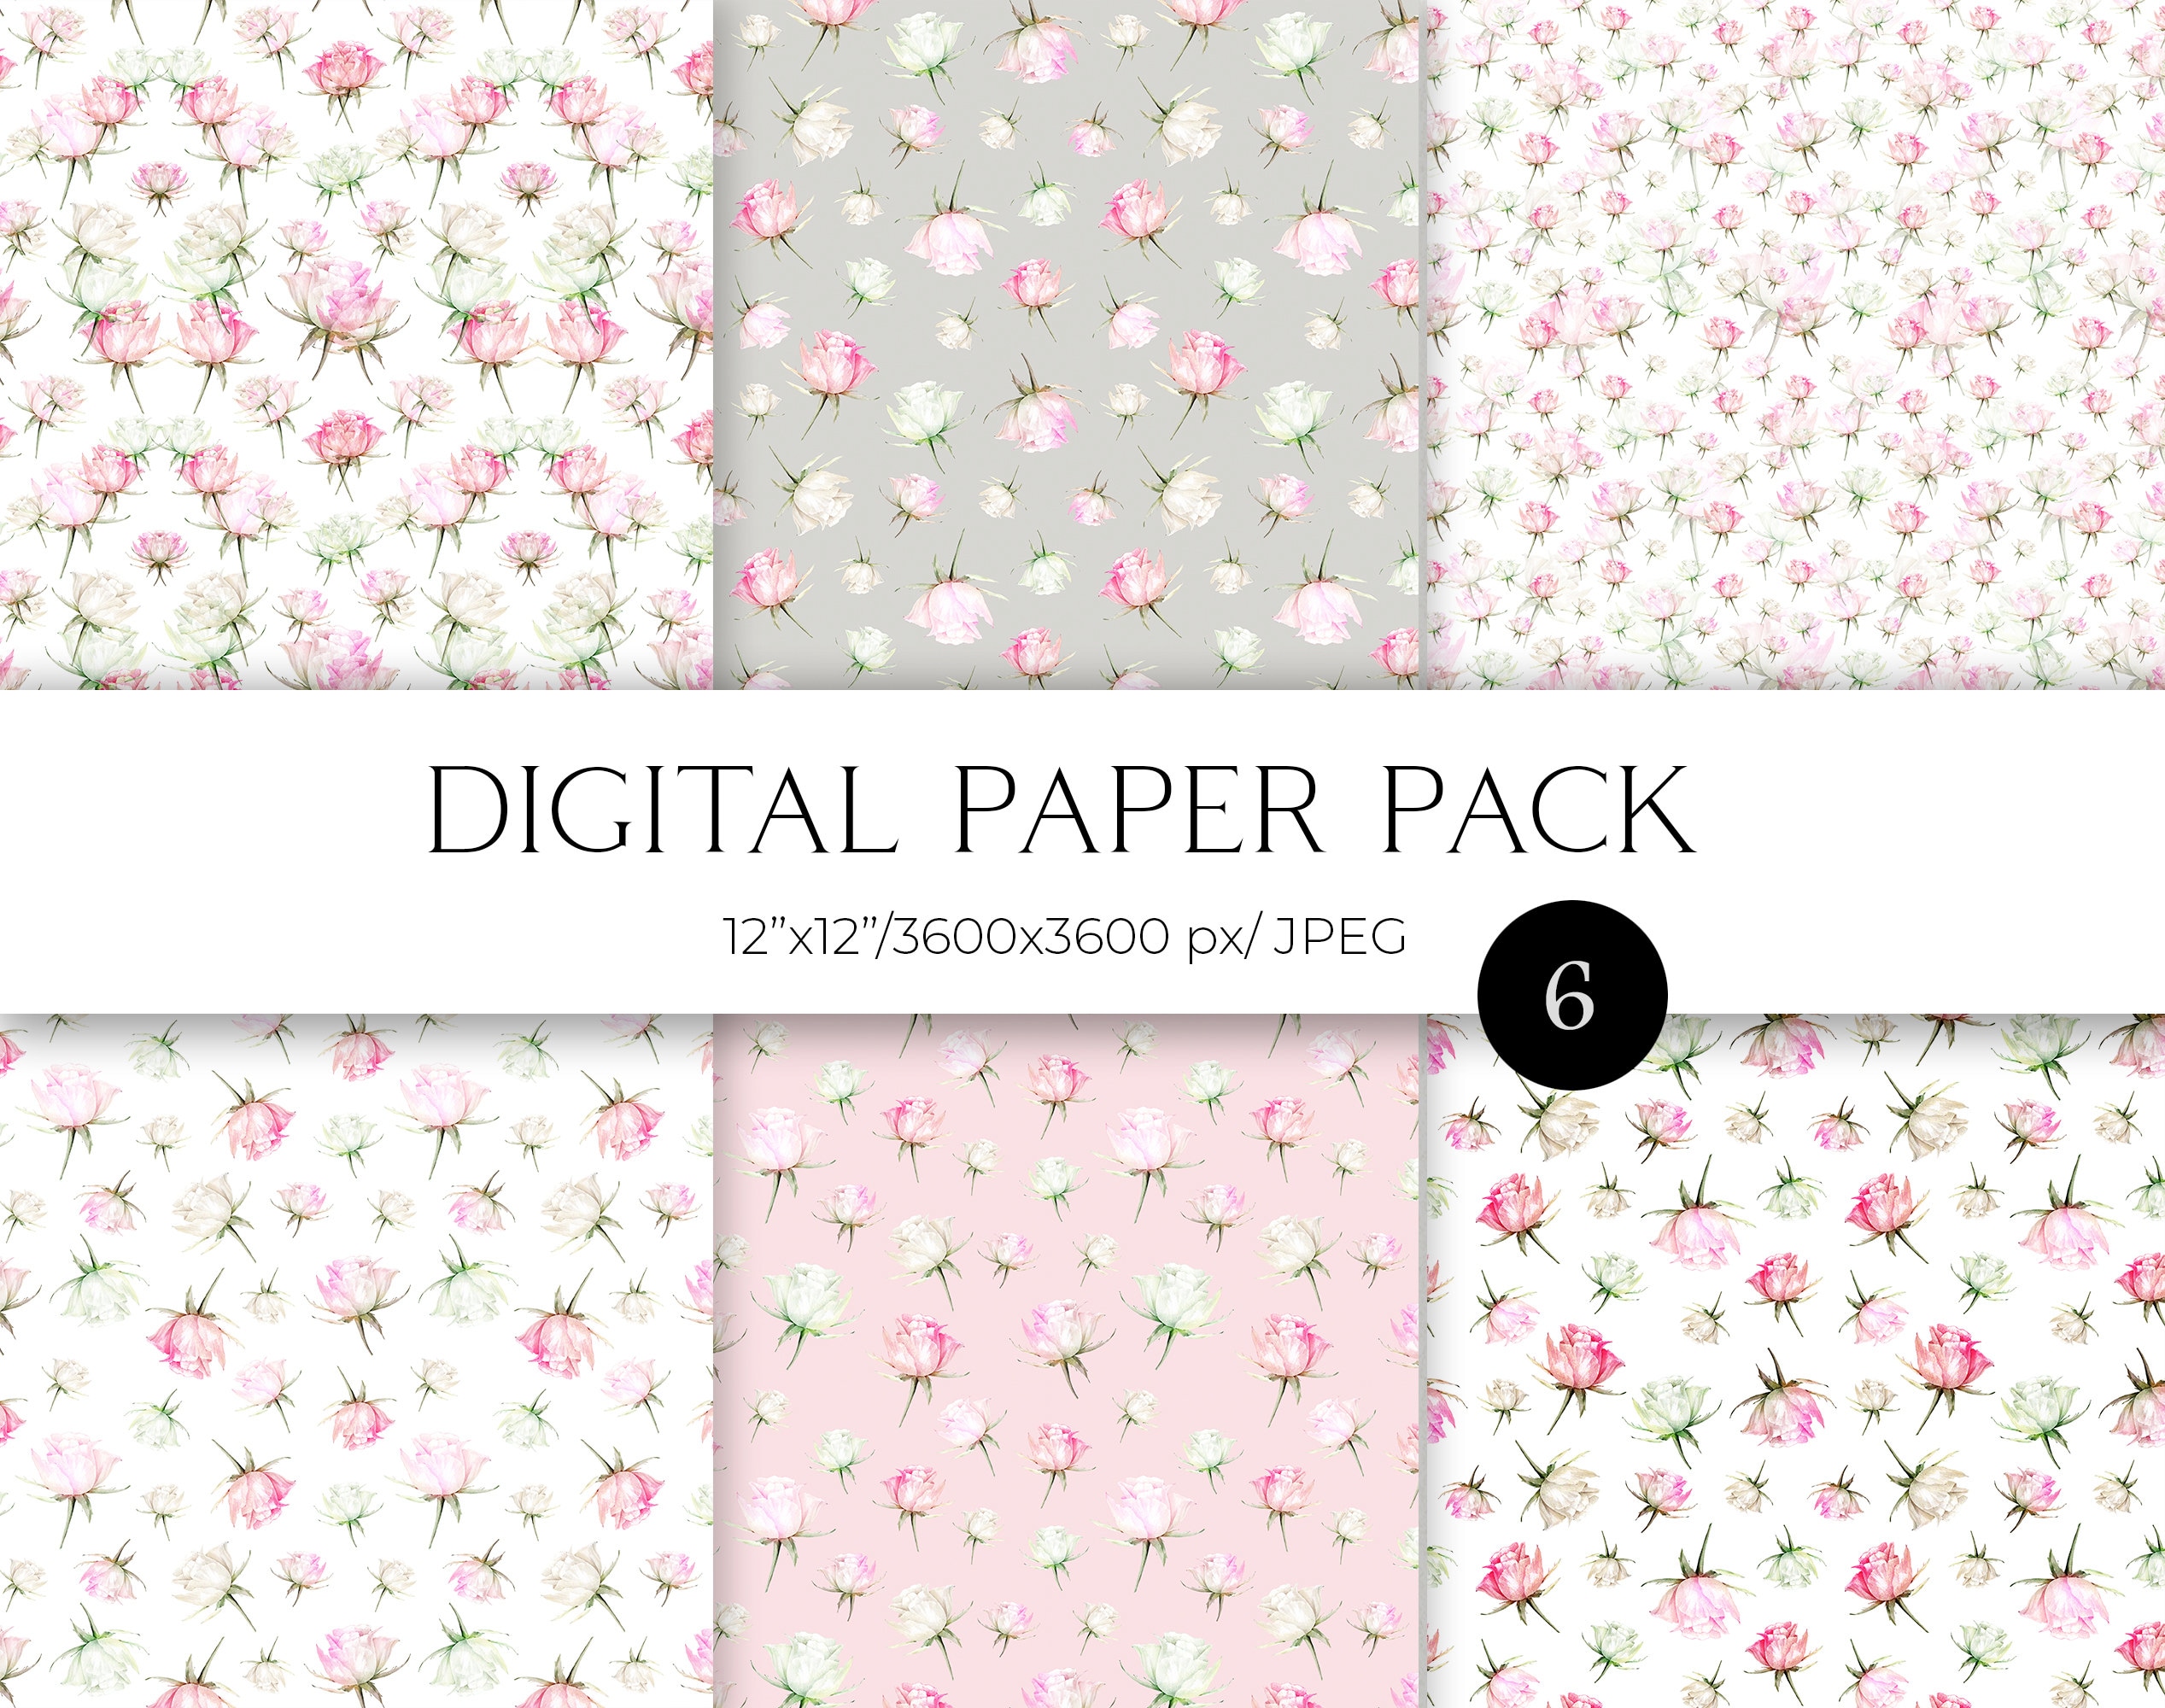 Pomegranate & Flowers tile patterned paper (free) 12x12